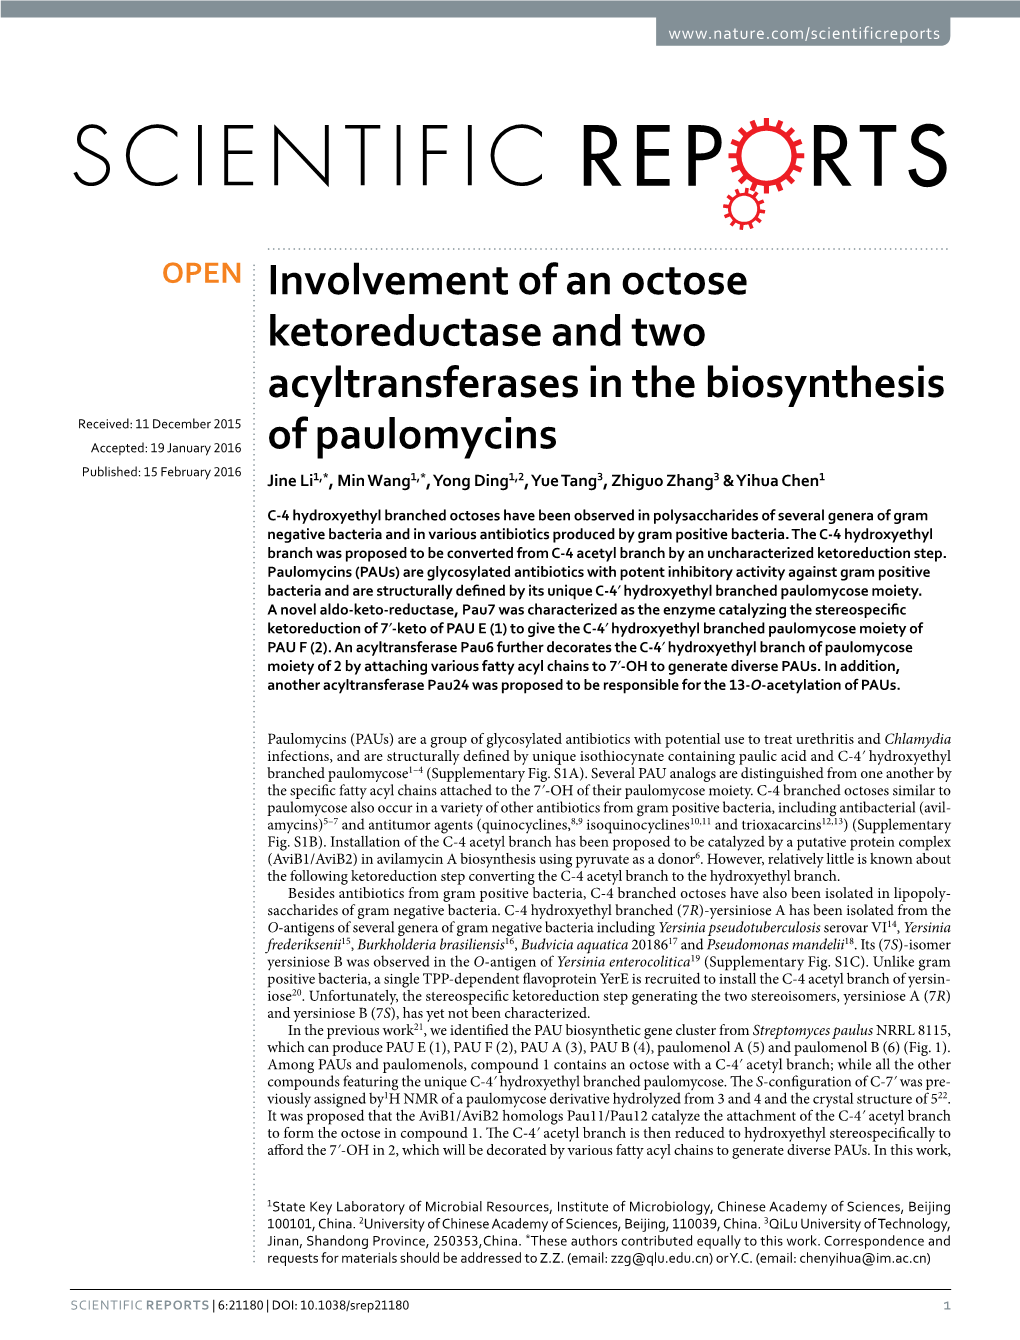 Involvement of an Octose Ketoreductase and Two